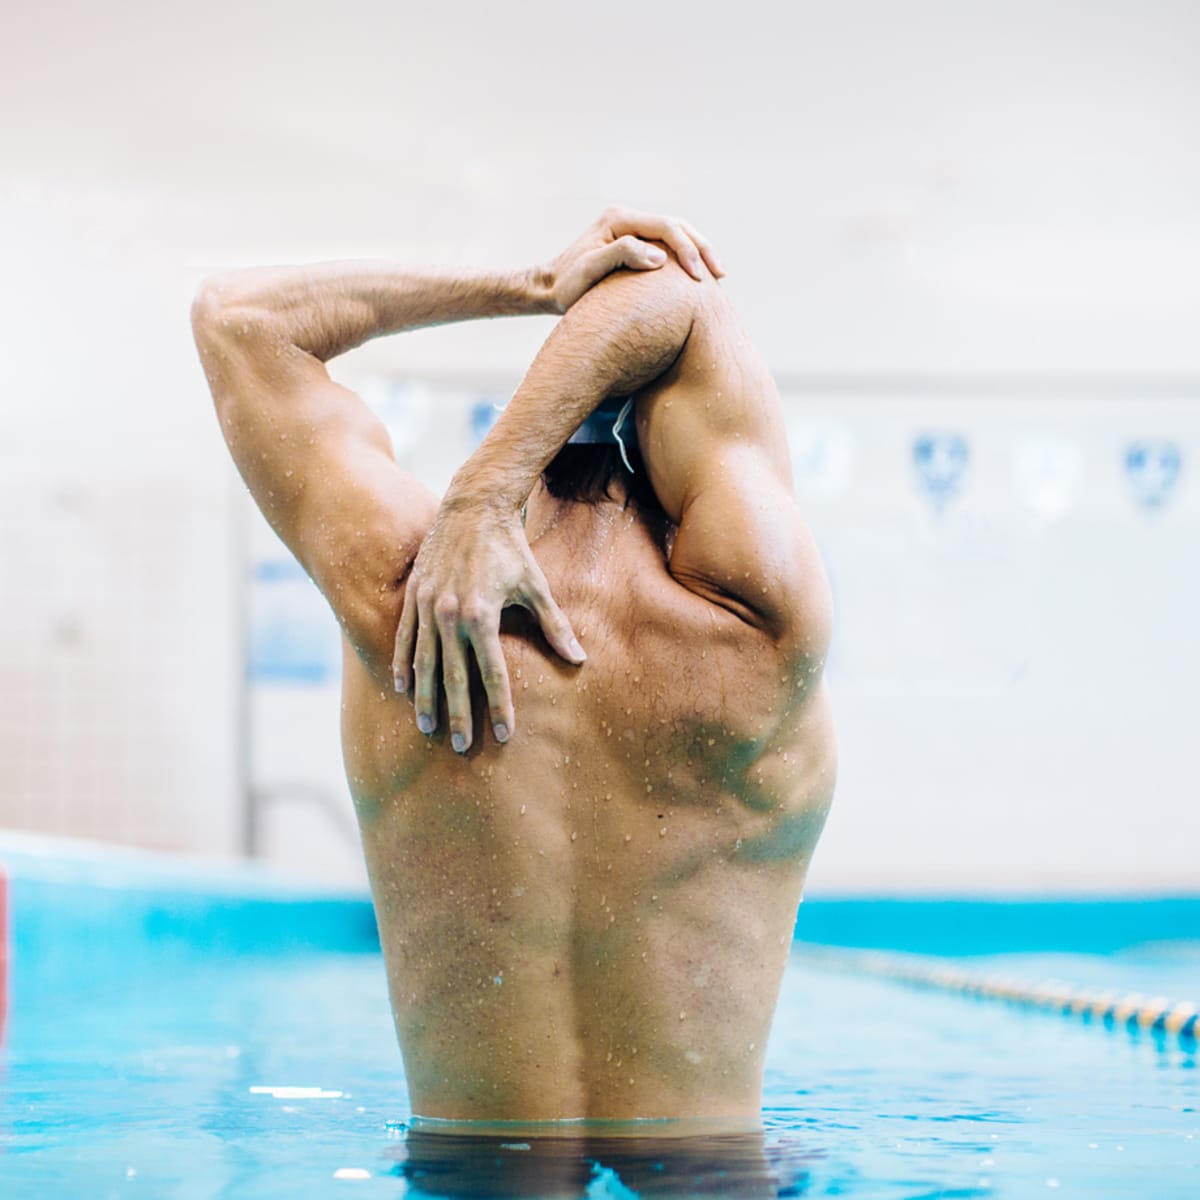 Swim Workouts for Every Fitness Level